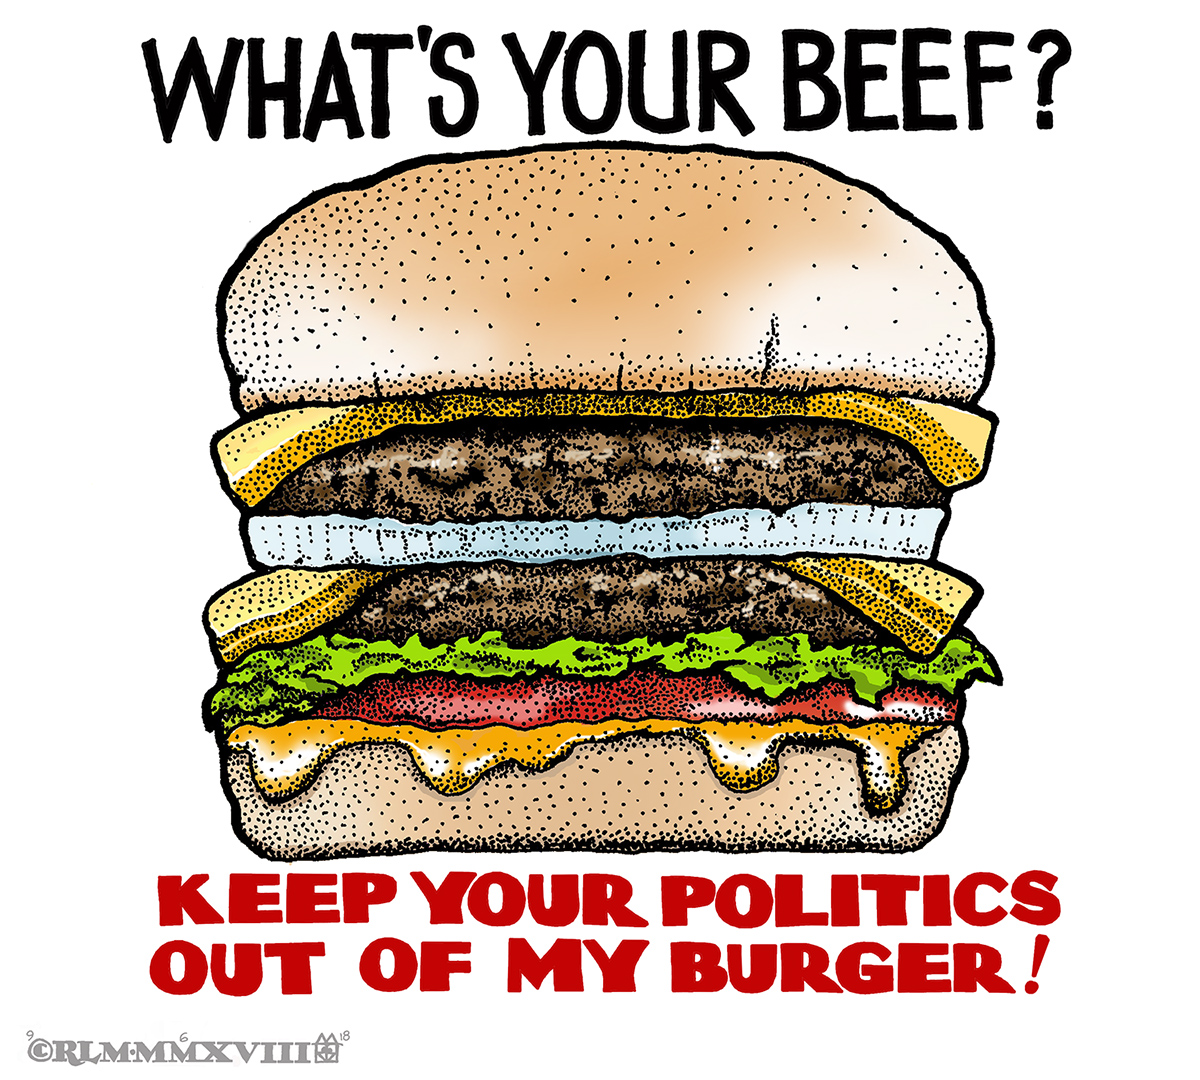 WHAT'S YOUR BEEF?